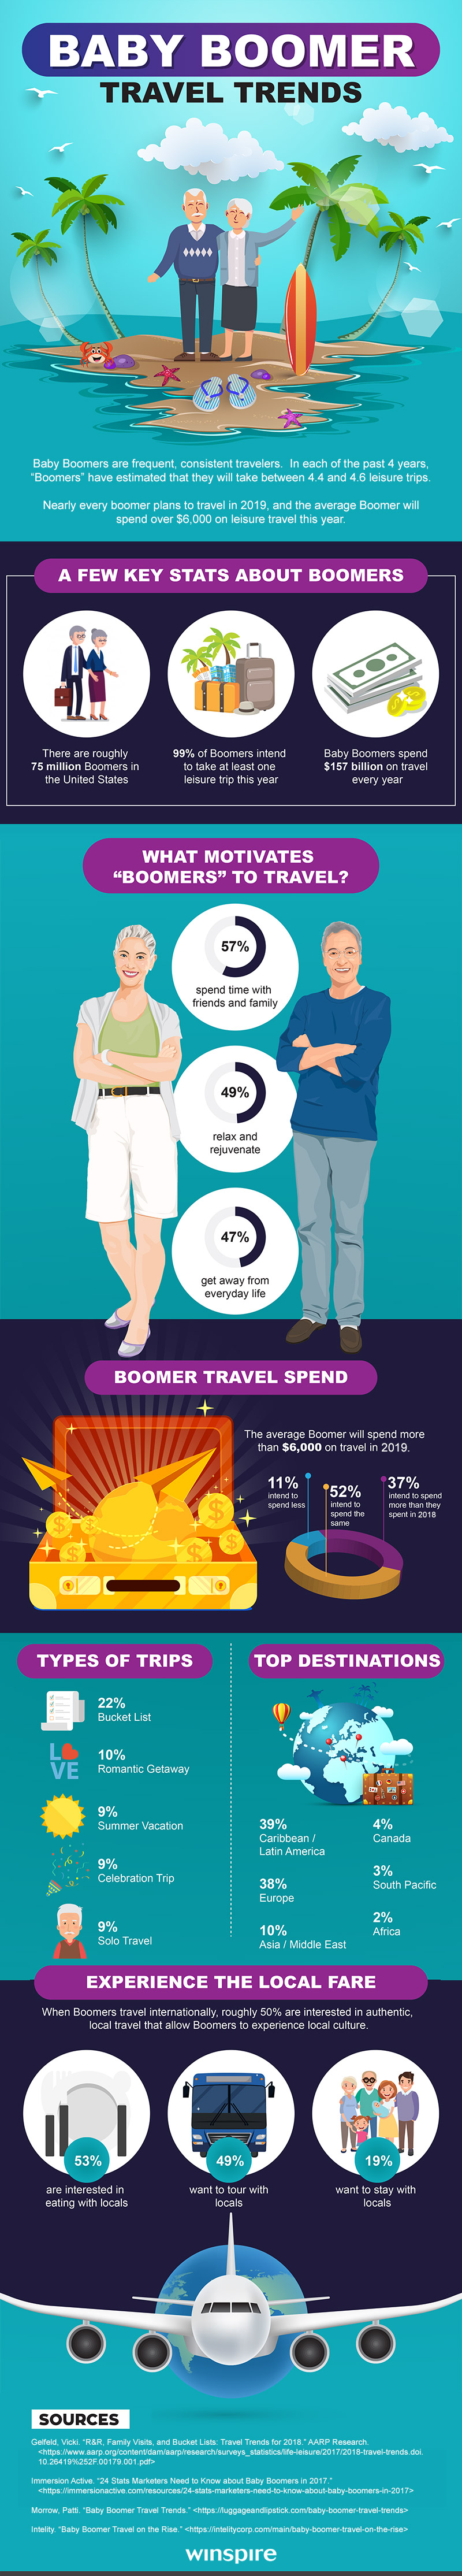 Baby Boomer Travel Trends Infographic